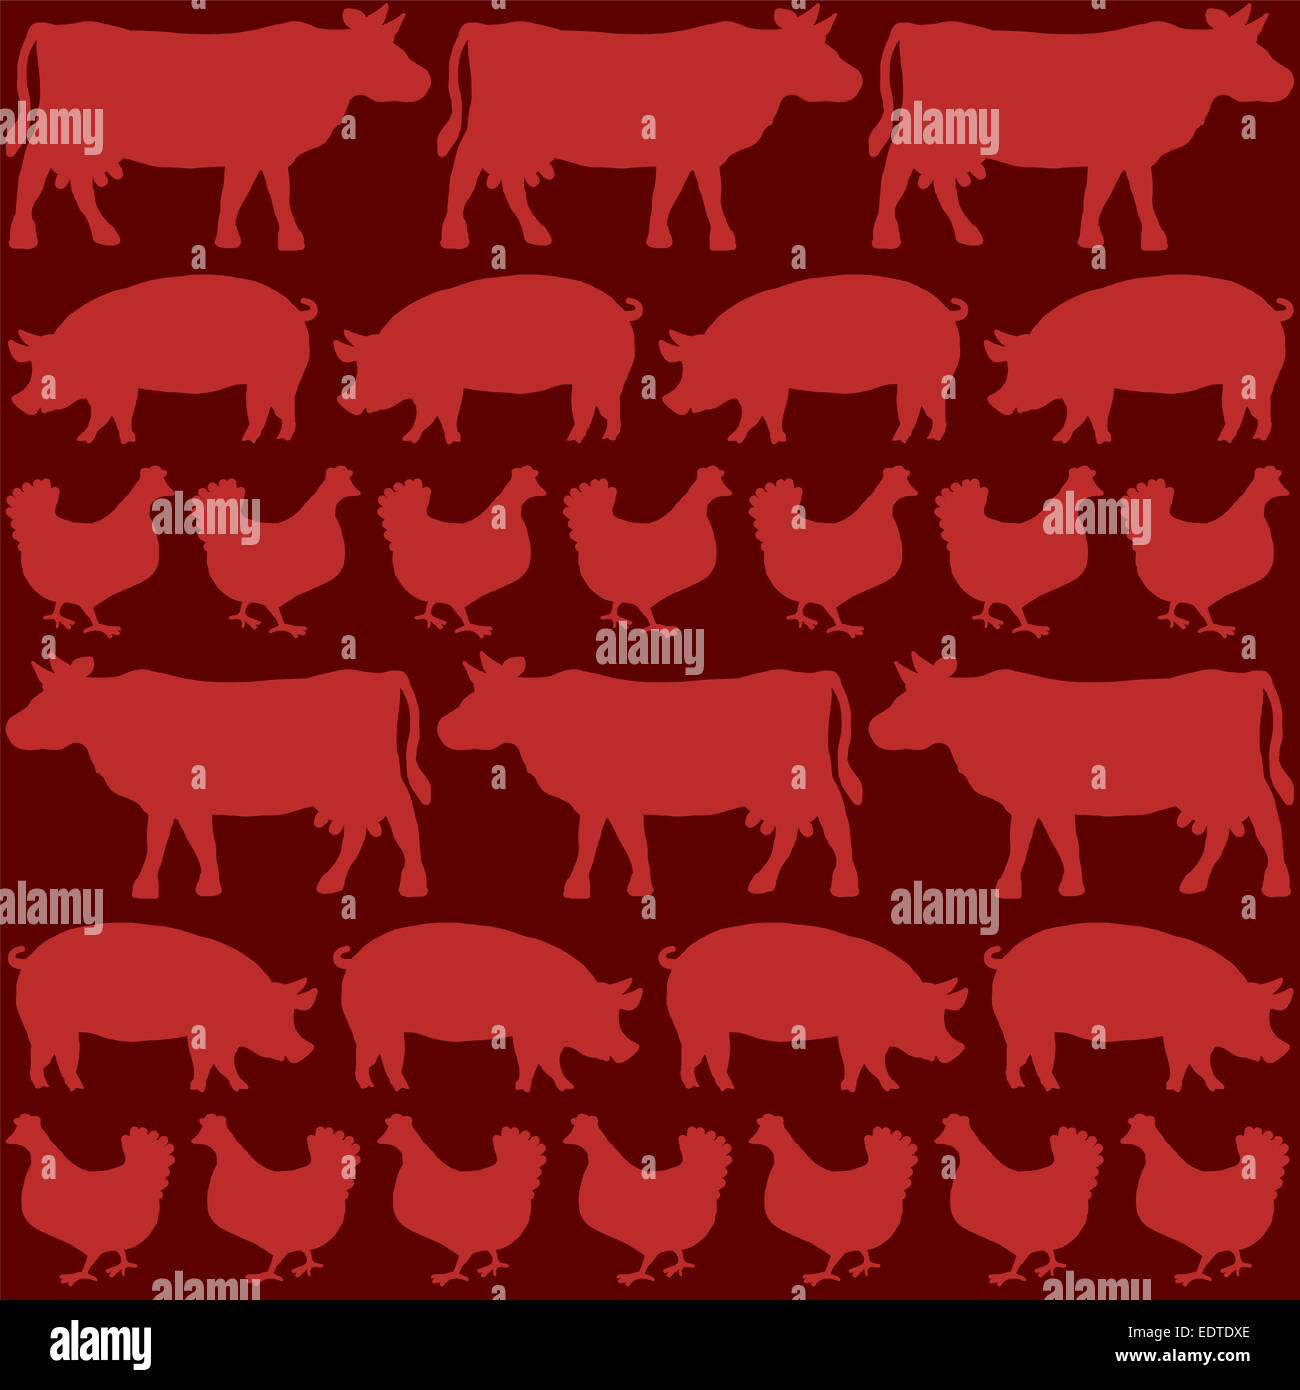 Beef, pork and chicken depicted with the silhouettes of cows, pigs and hens on a blood red background. Stock Photo